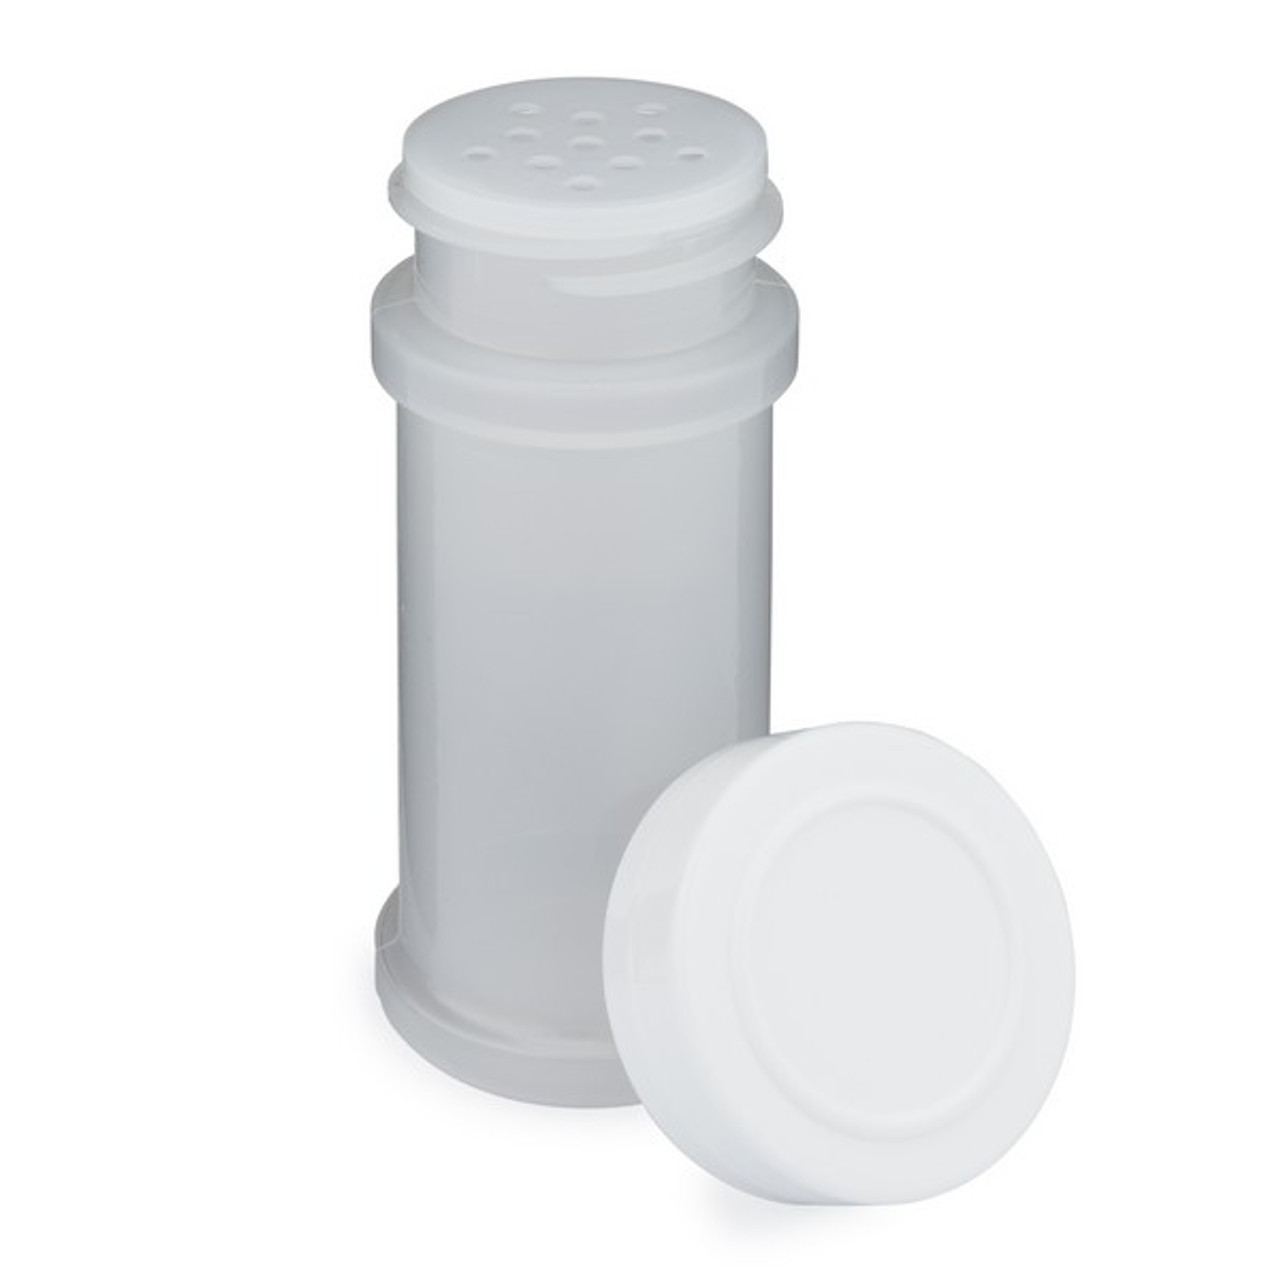 3 oz. Round Spice Bottle with White Lid